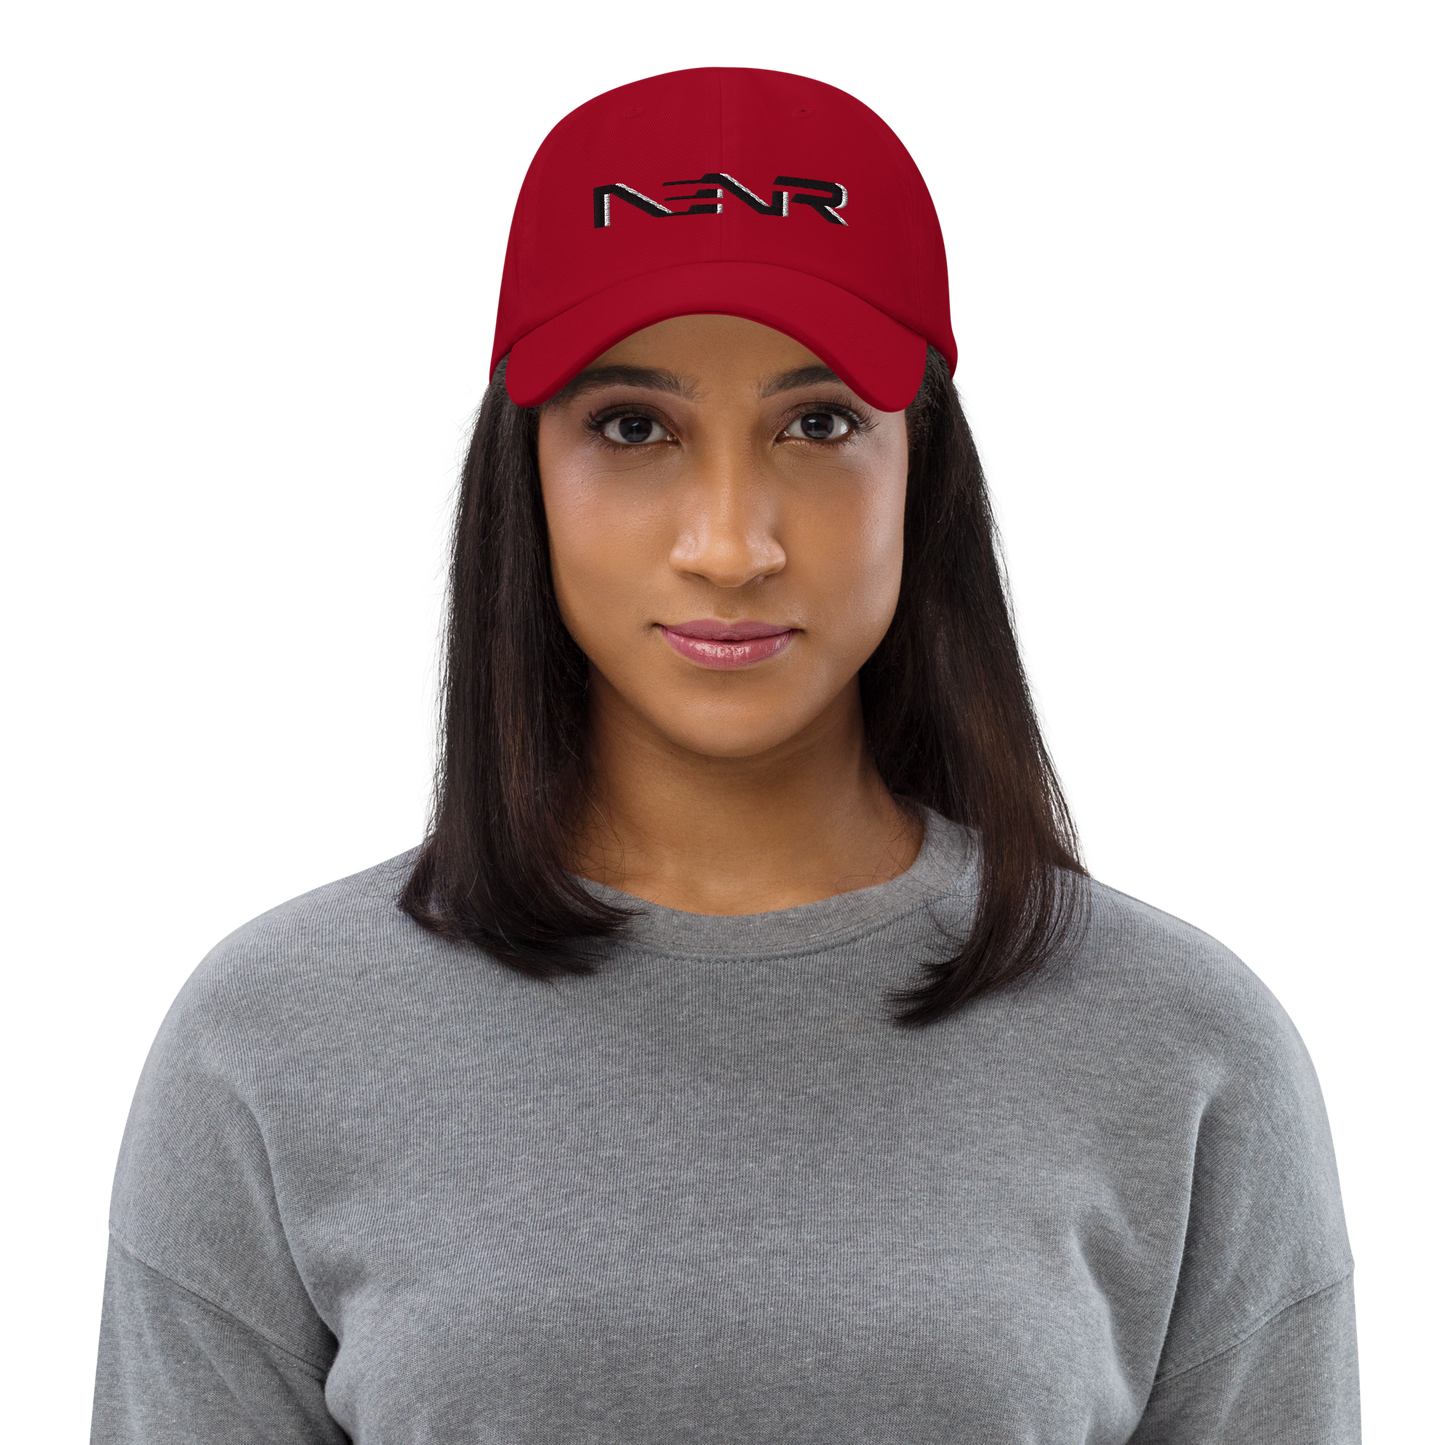 NO EXCUSES NO REGRETS ~ NENR EMBROIDERED HAT